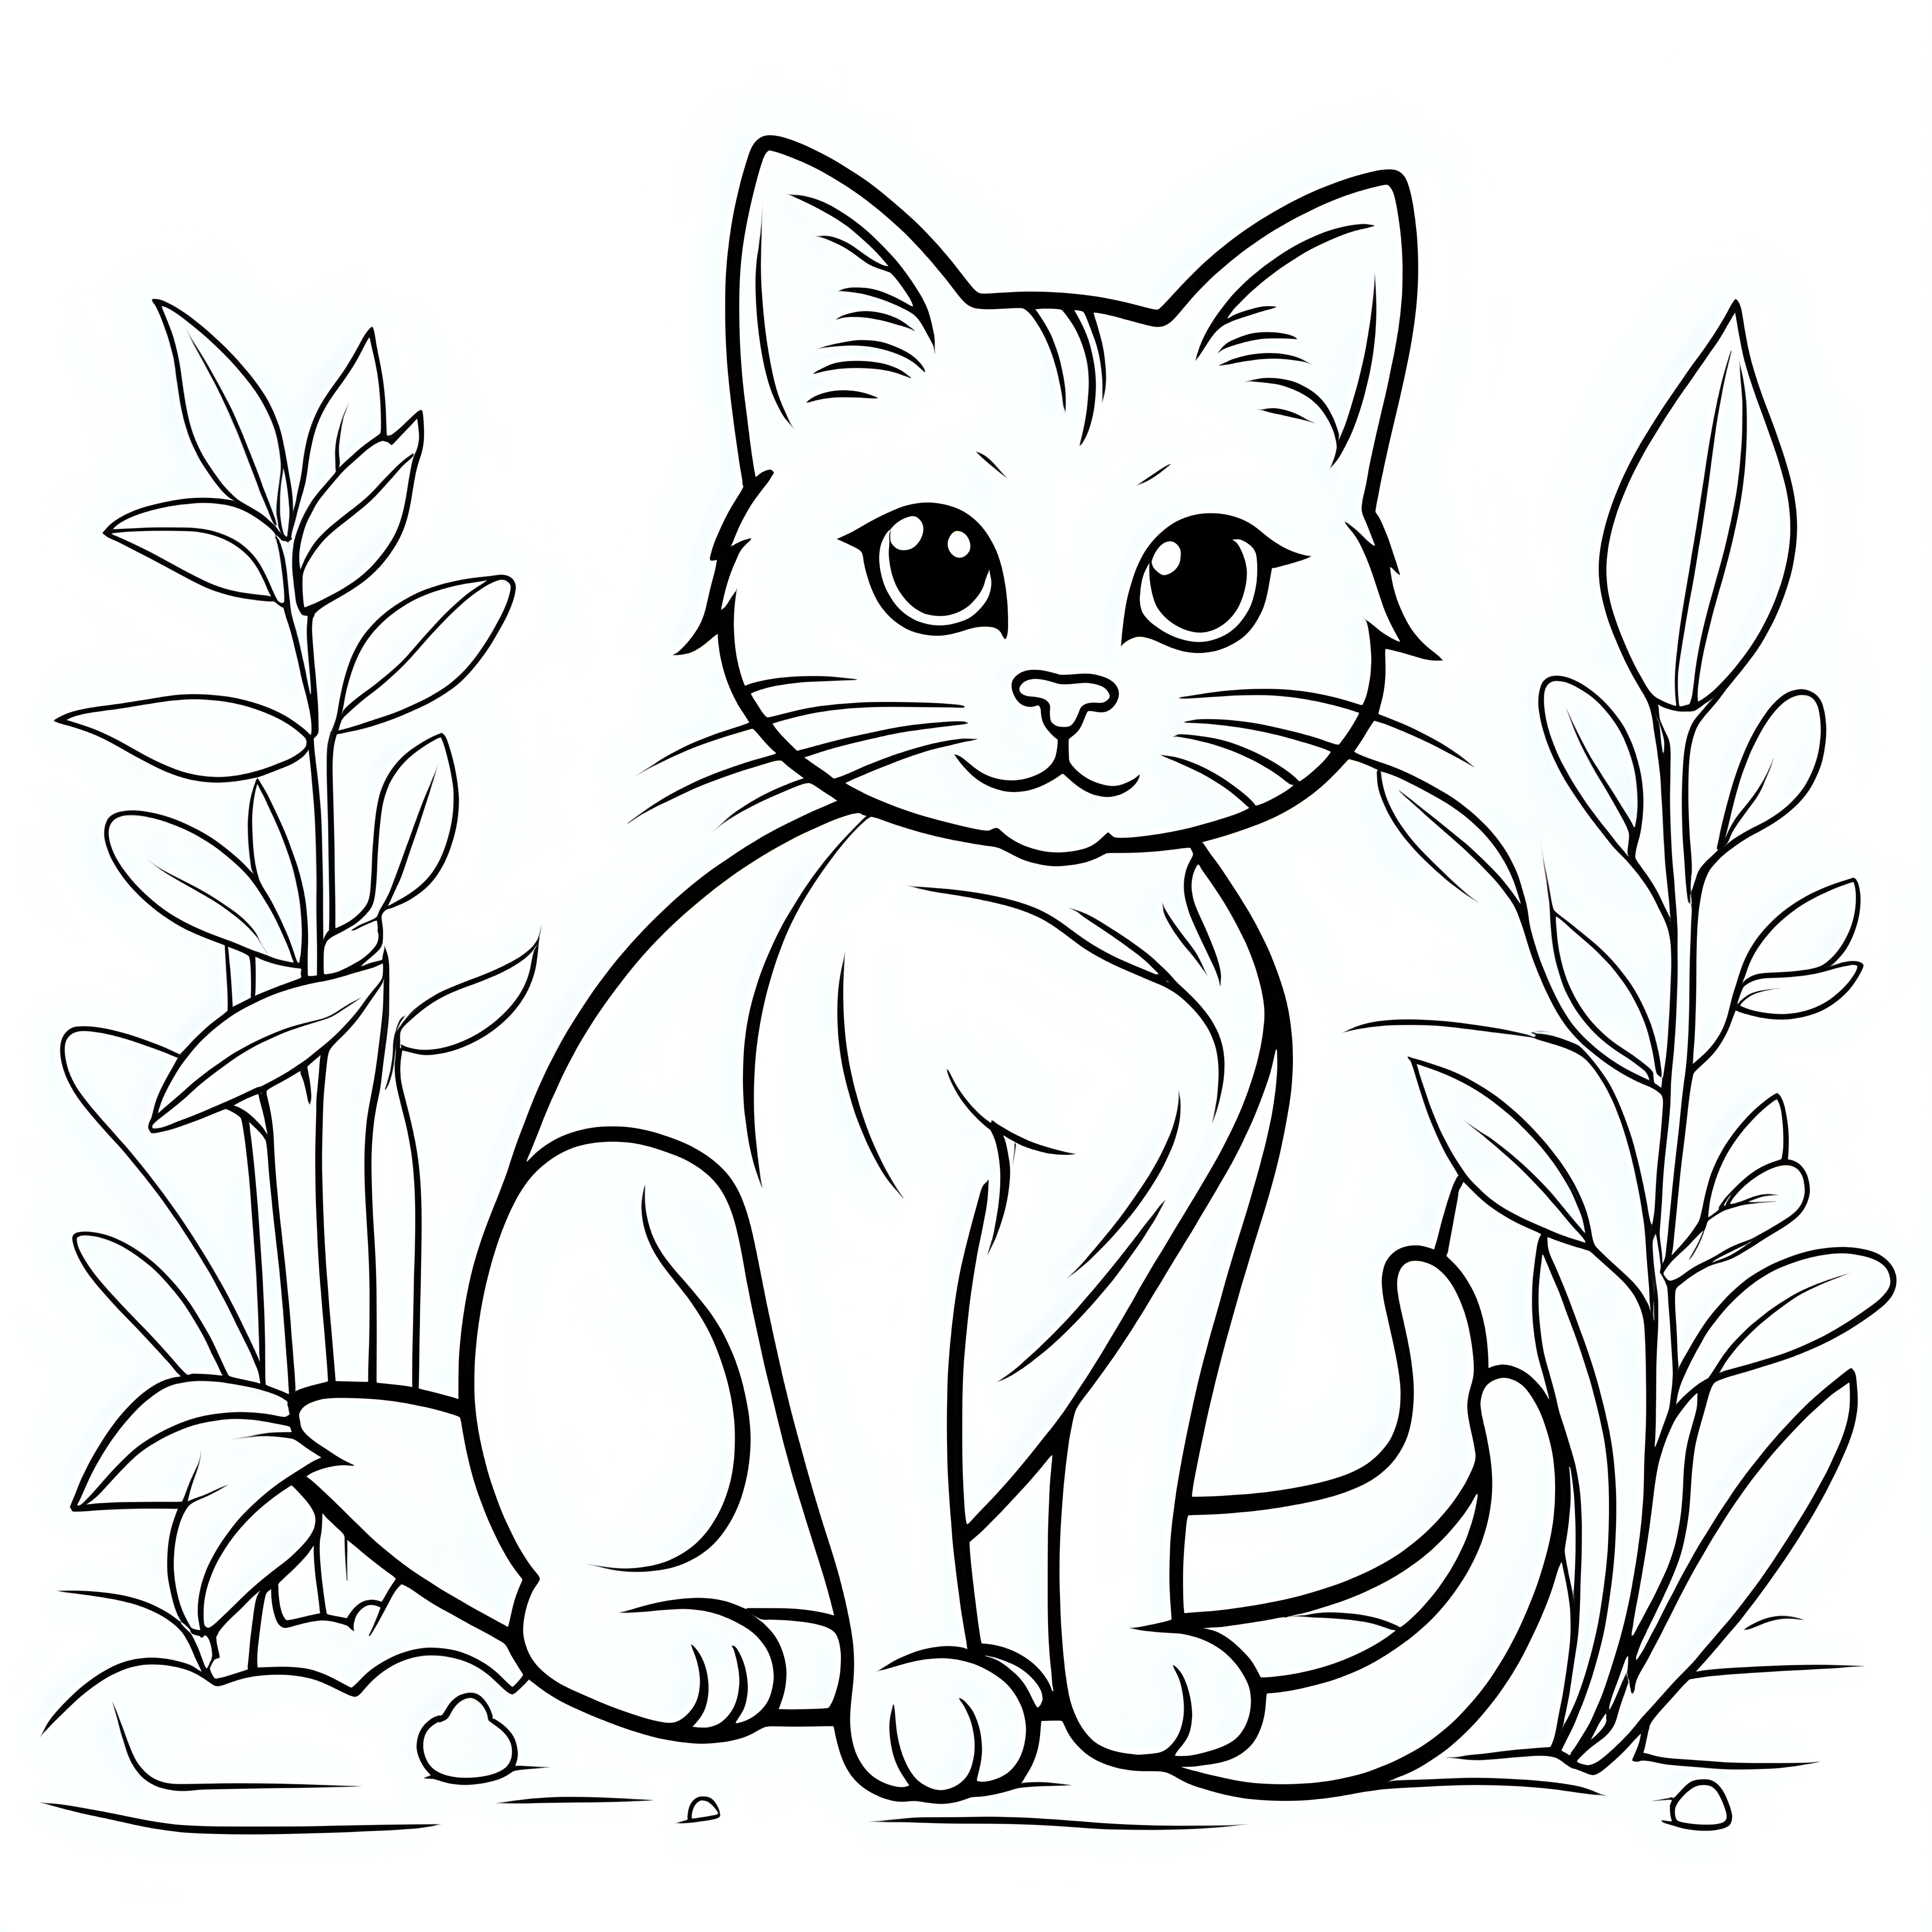 draw a cute cat with only the outline